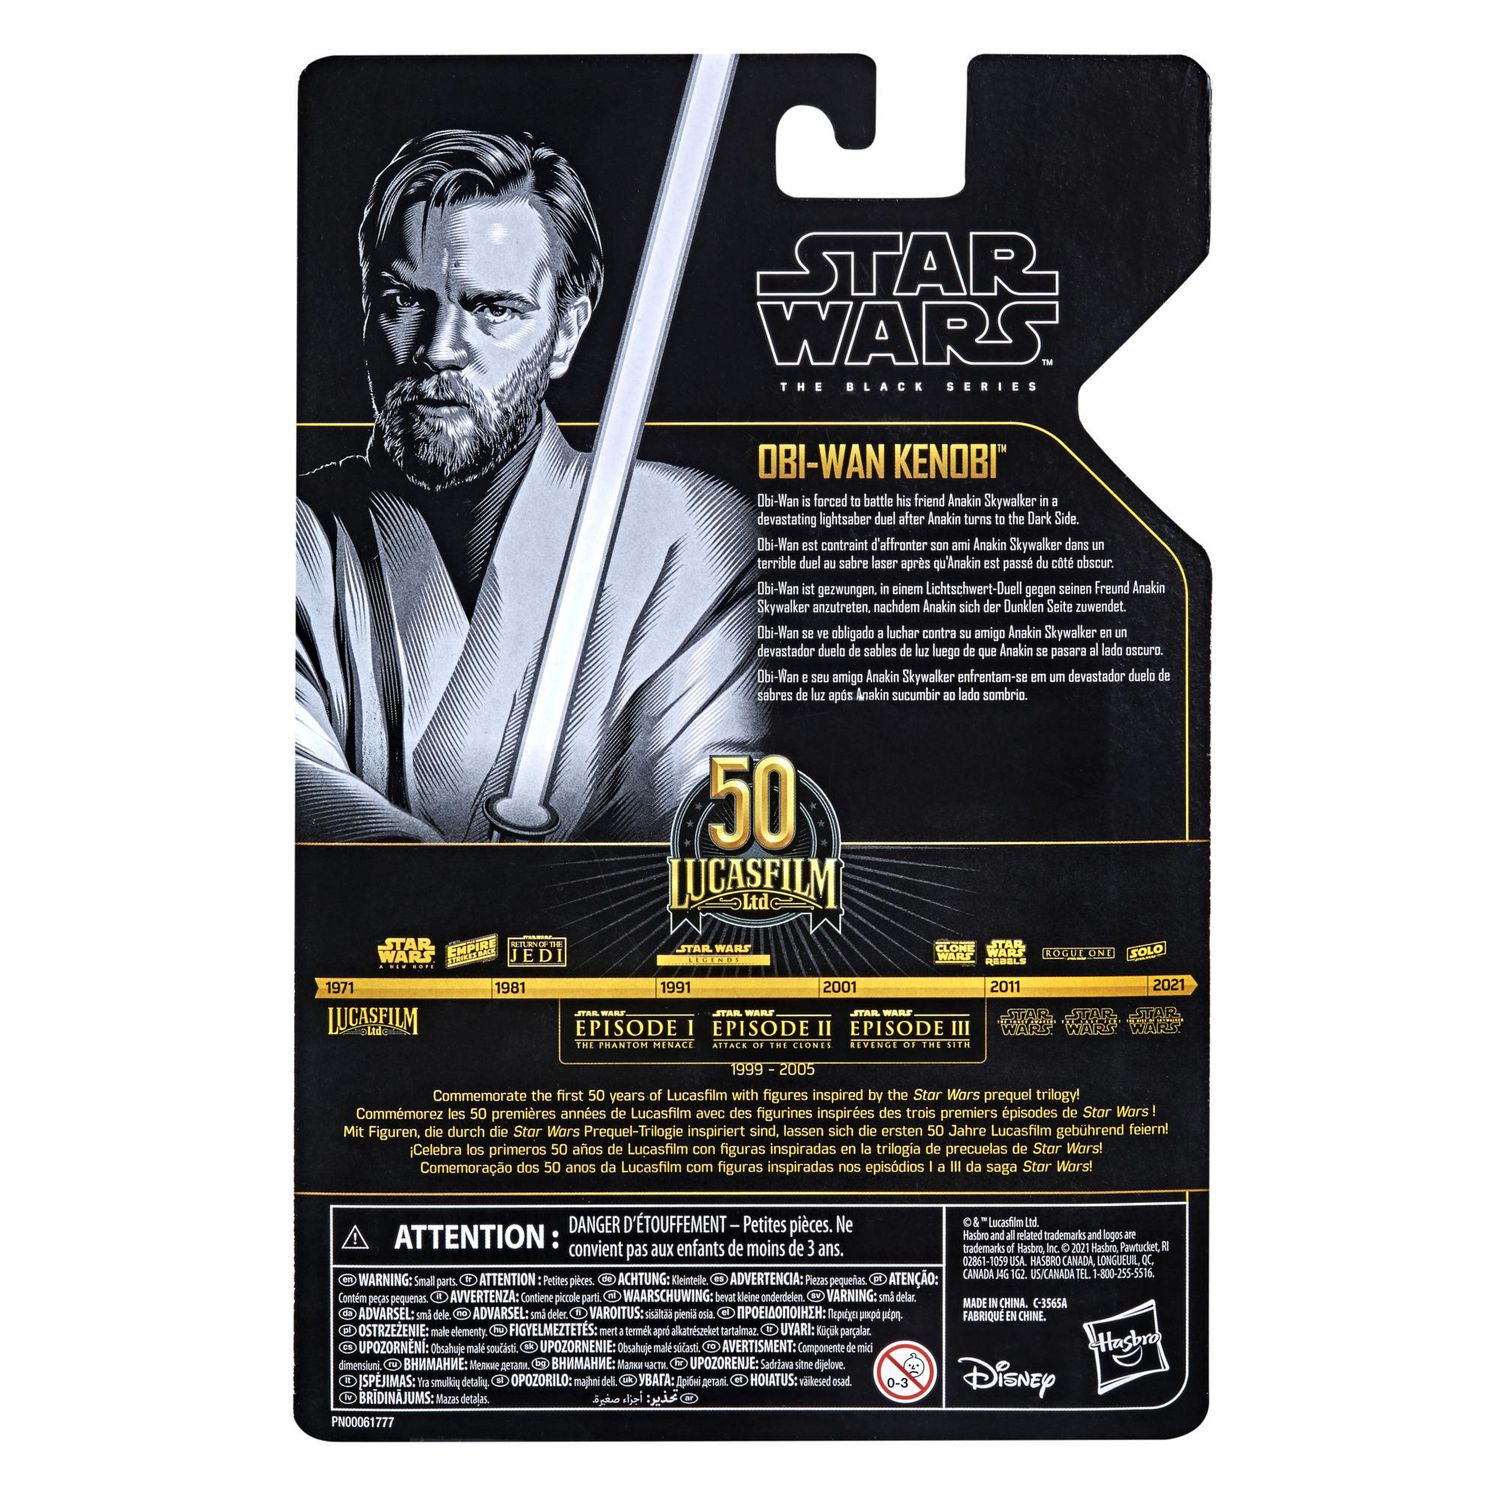 Star Wars The Black Series Archive Collection Obi-Wan Kenobi 6-Inch-Scale  Star Wars: Revenge of the Sith Lucasfilm 50th Anniversary Figure